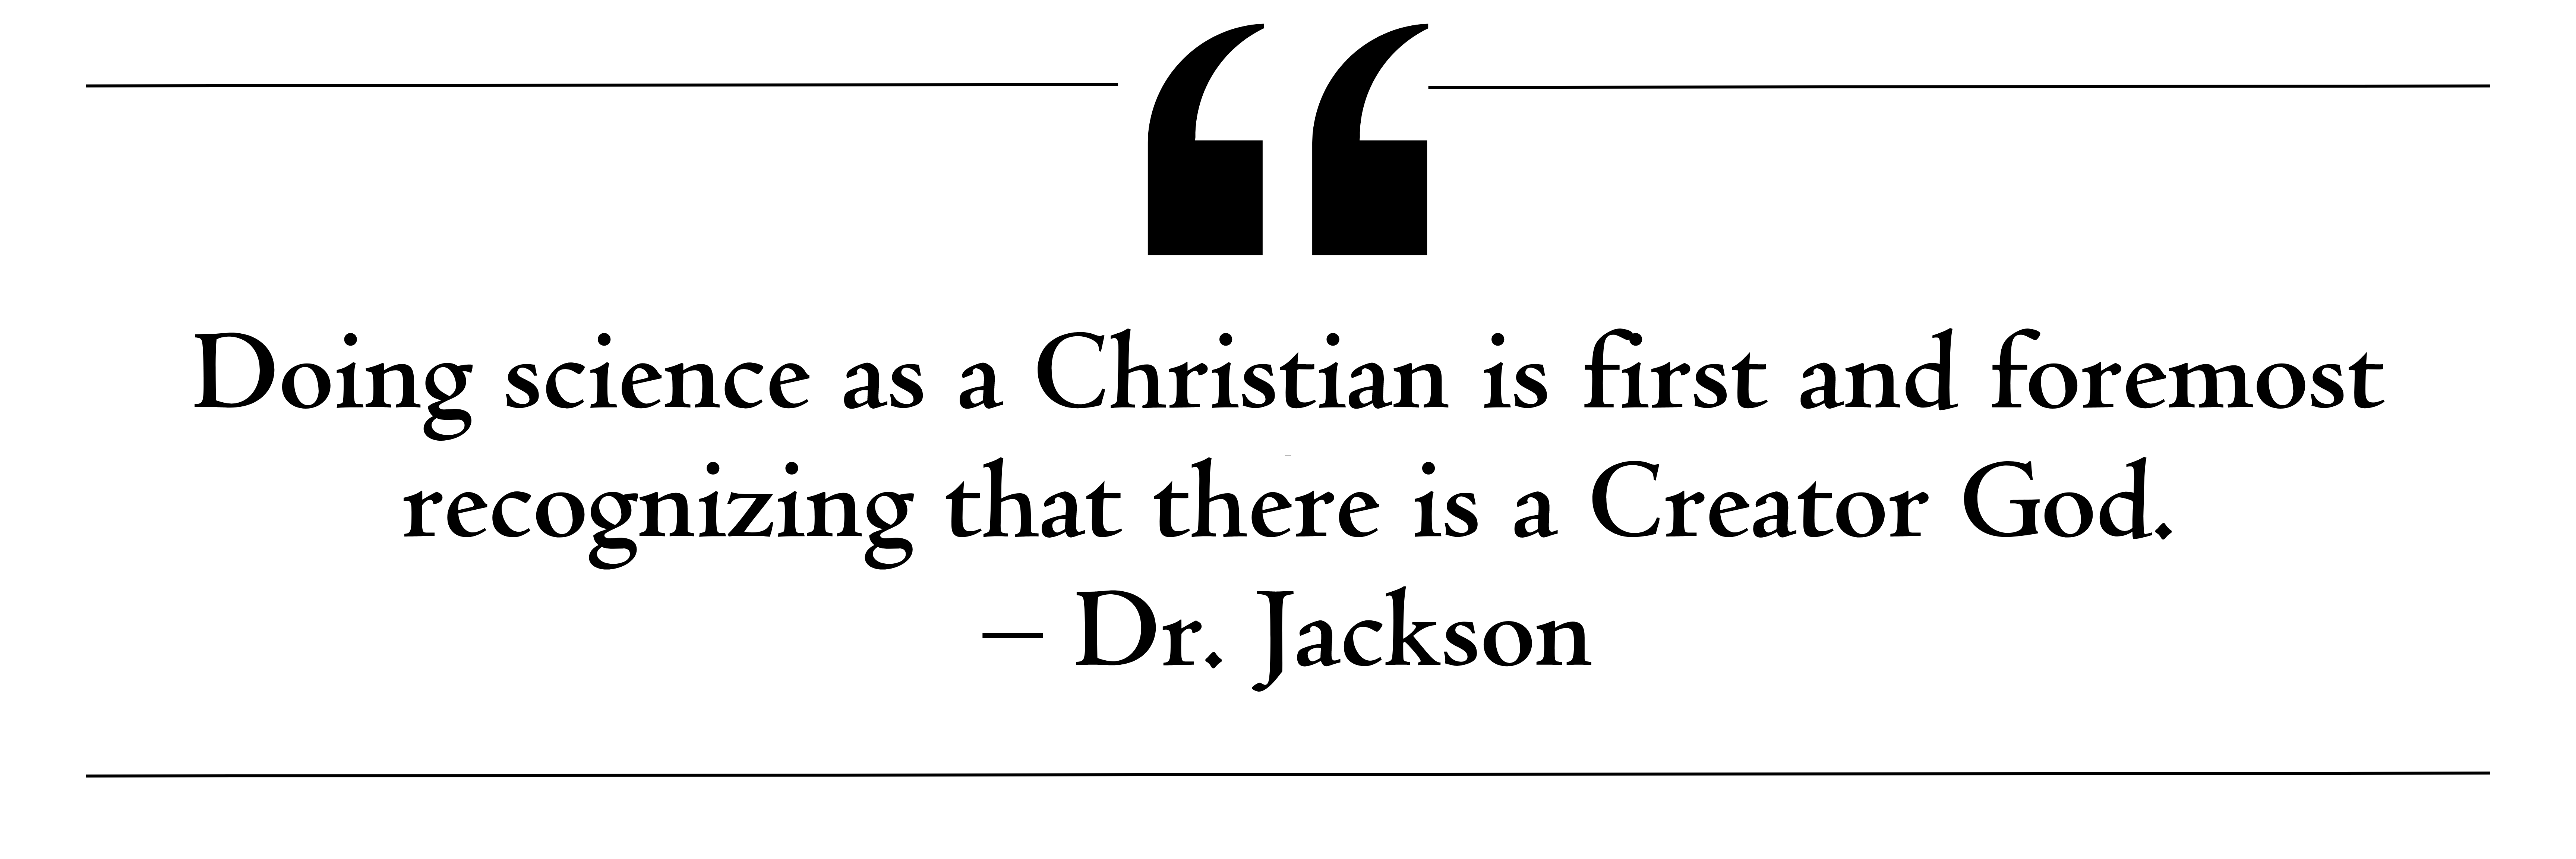 Dr. Jackson Pull quote